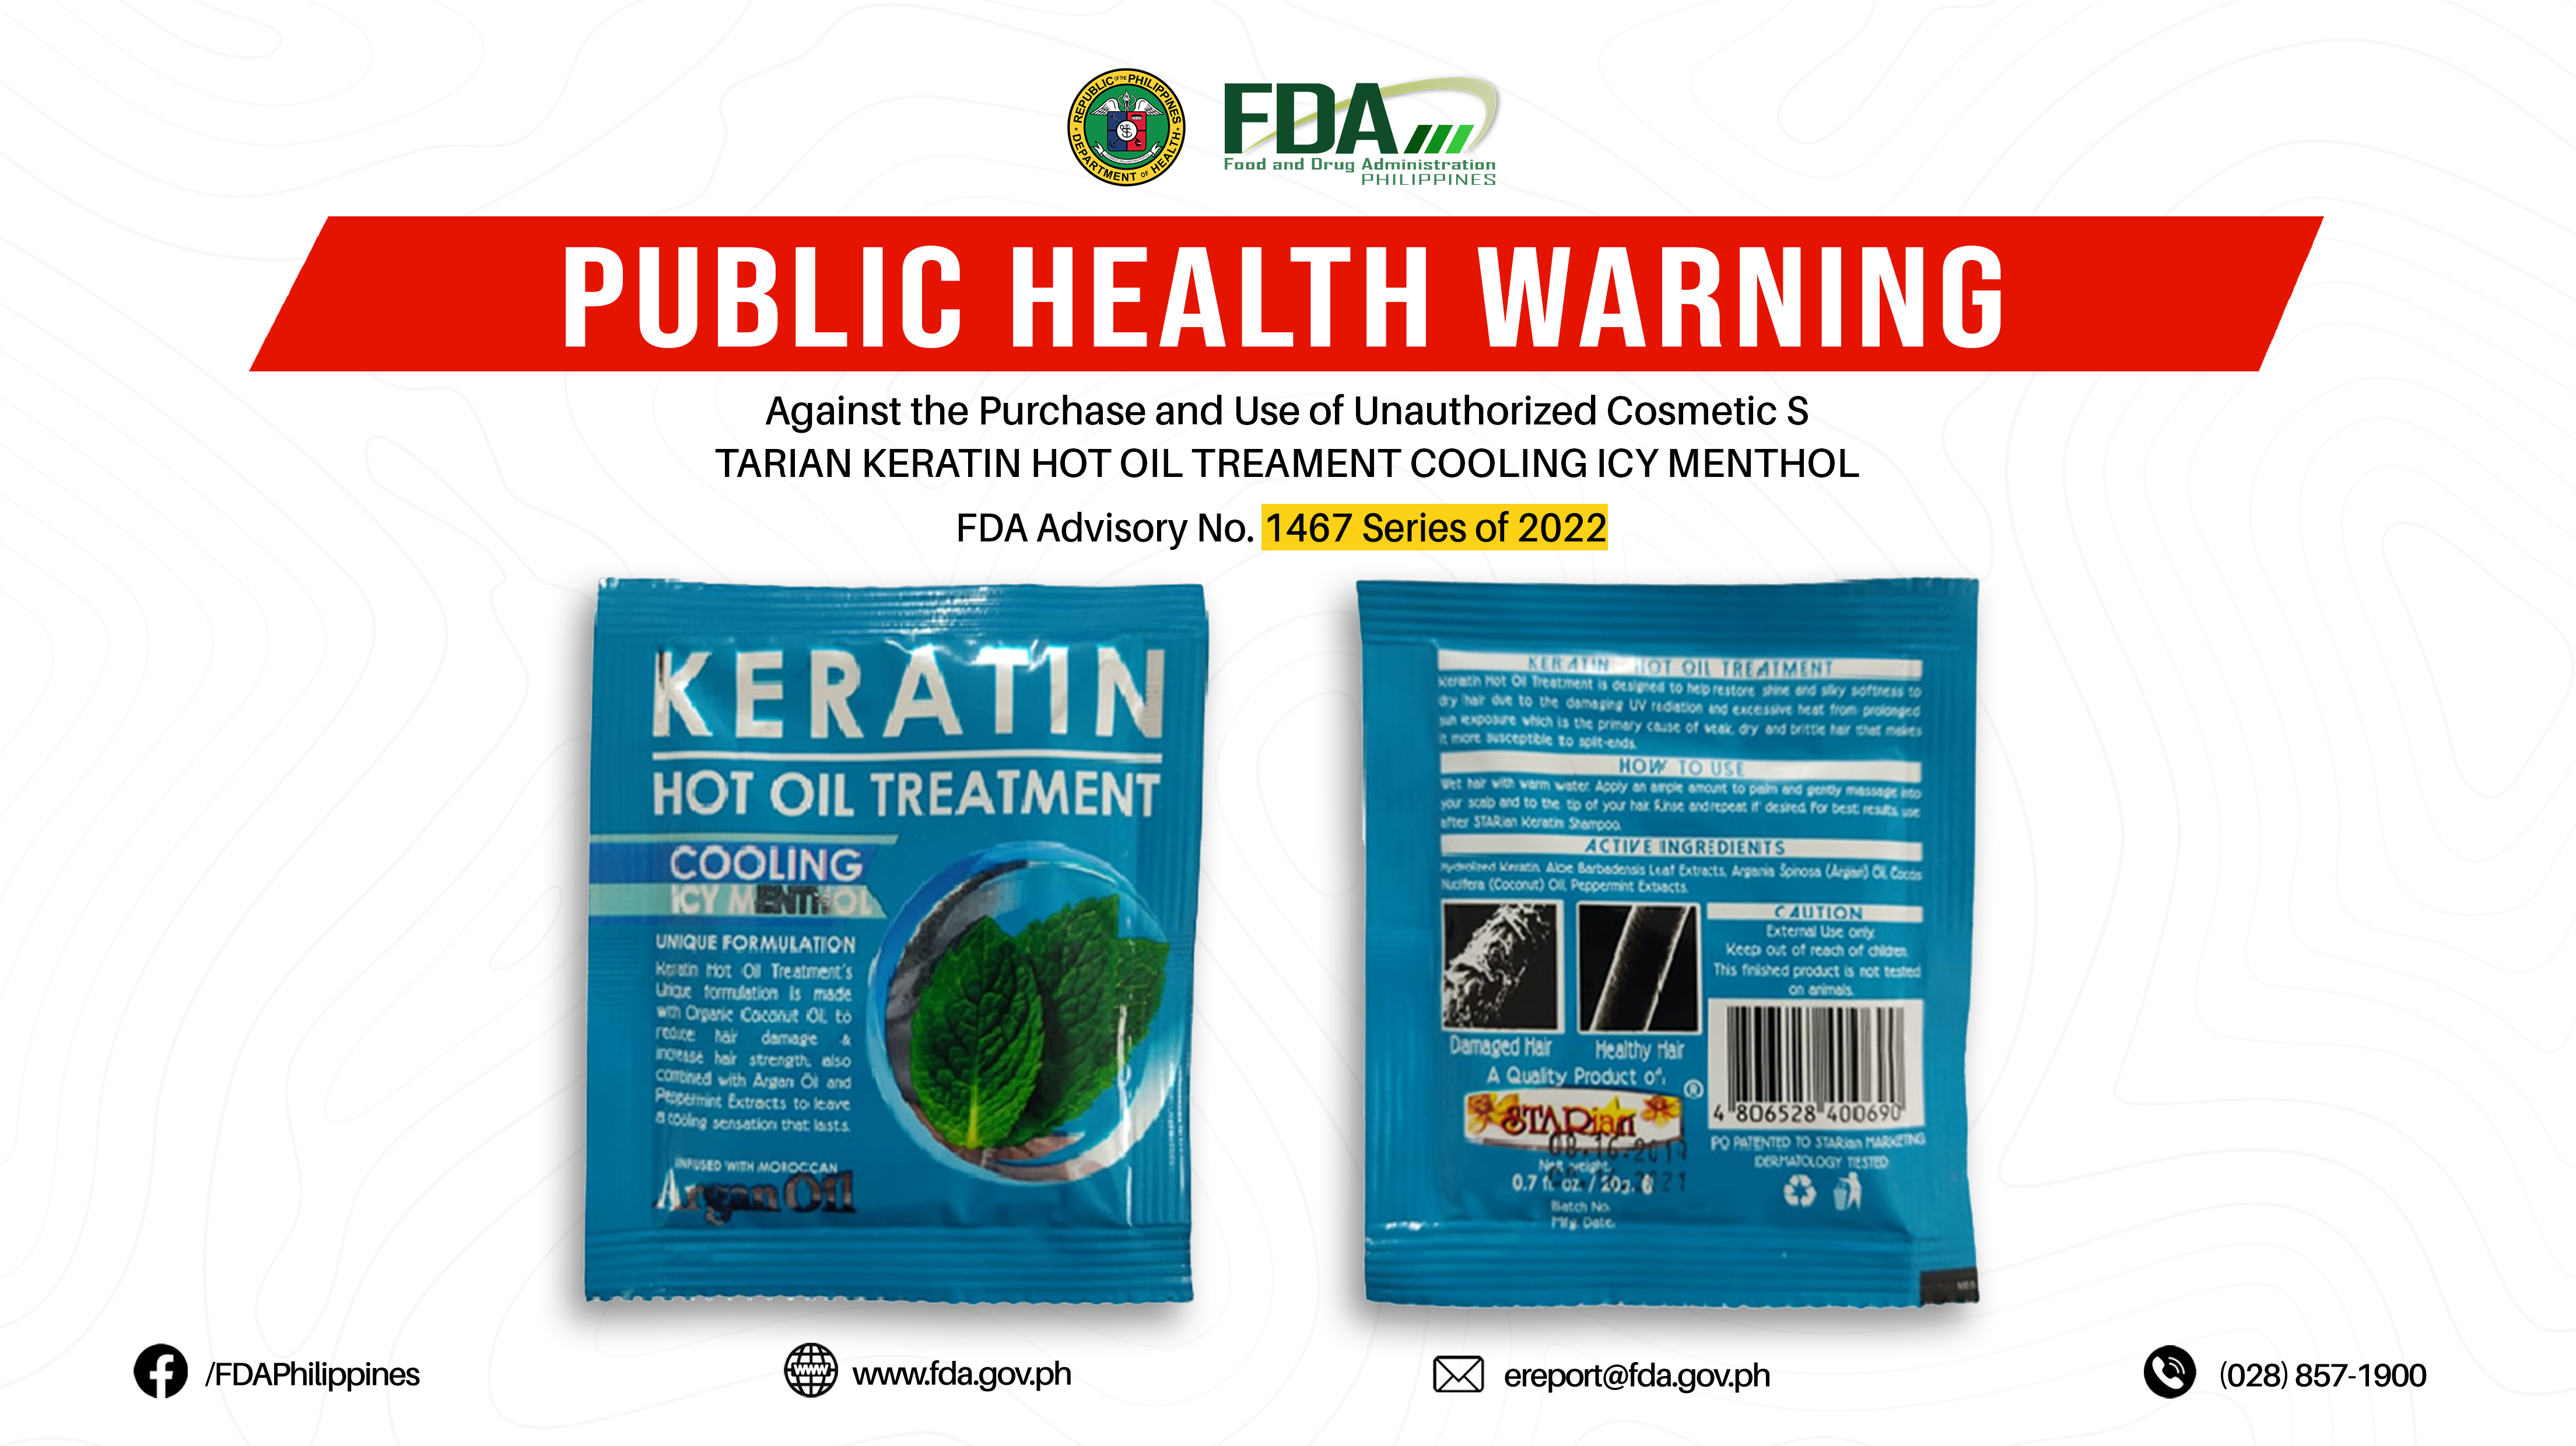 FDA Advisory No.2022-1467 || Public Health Warning Against the Purchase and Use of Unauthorized Cosmetic STARIAN KERATIN HOT OIL TREAMENT COOLING ICY MENTHOL